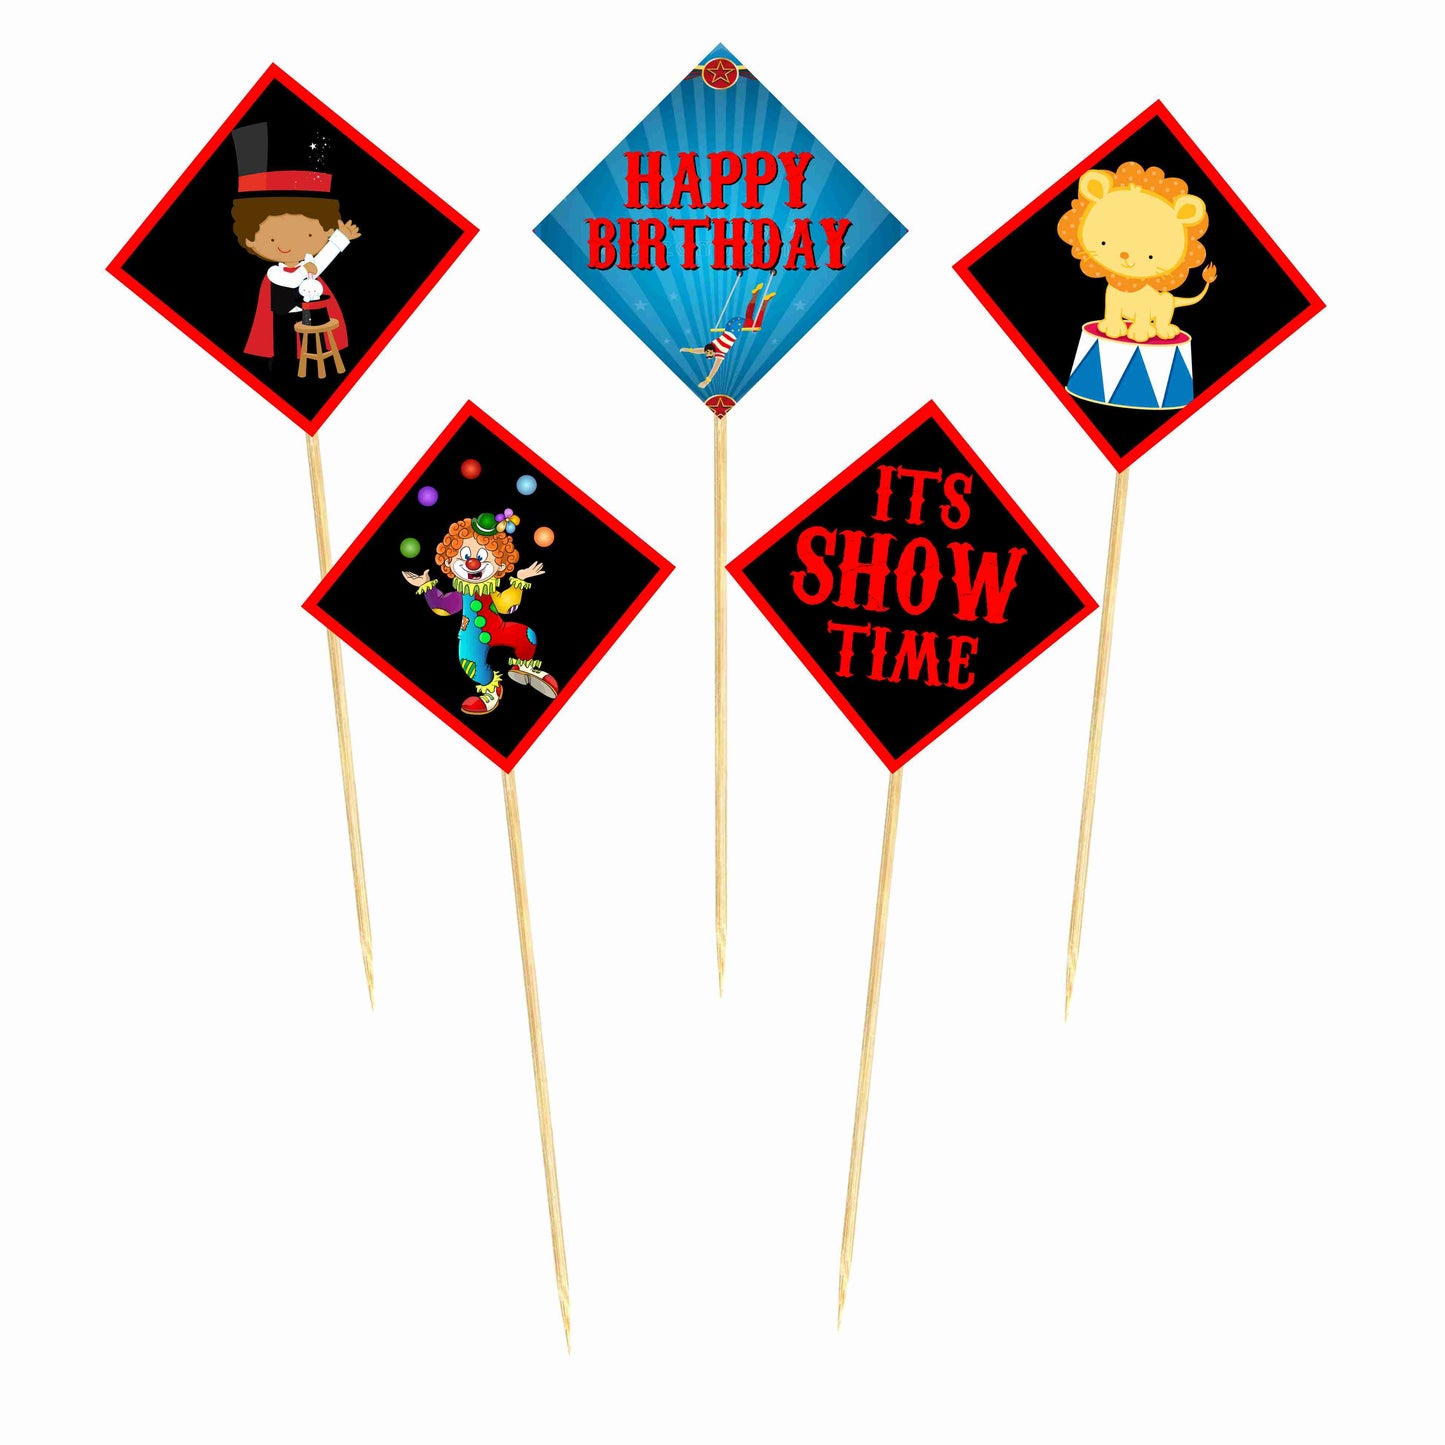 Circus Theme Cake Topper Pack of 10 Nos for Birthday Cake Decoration Theme Party Item For Boys Girls Adults Birthday Theme Decor